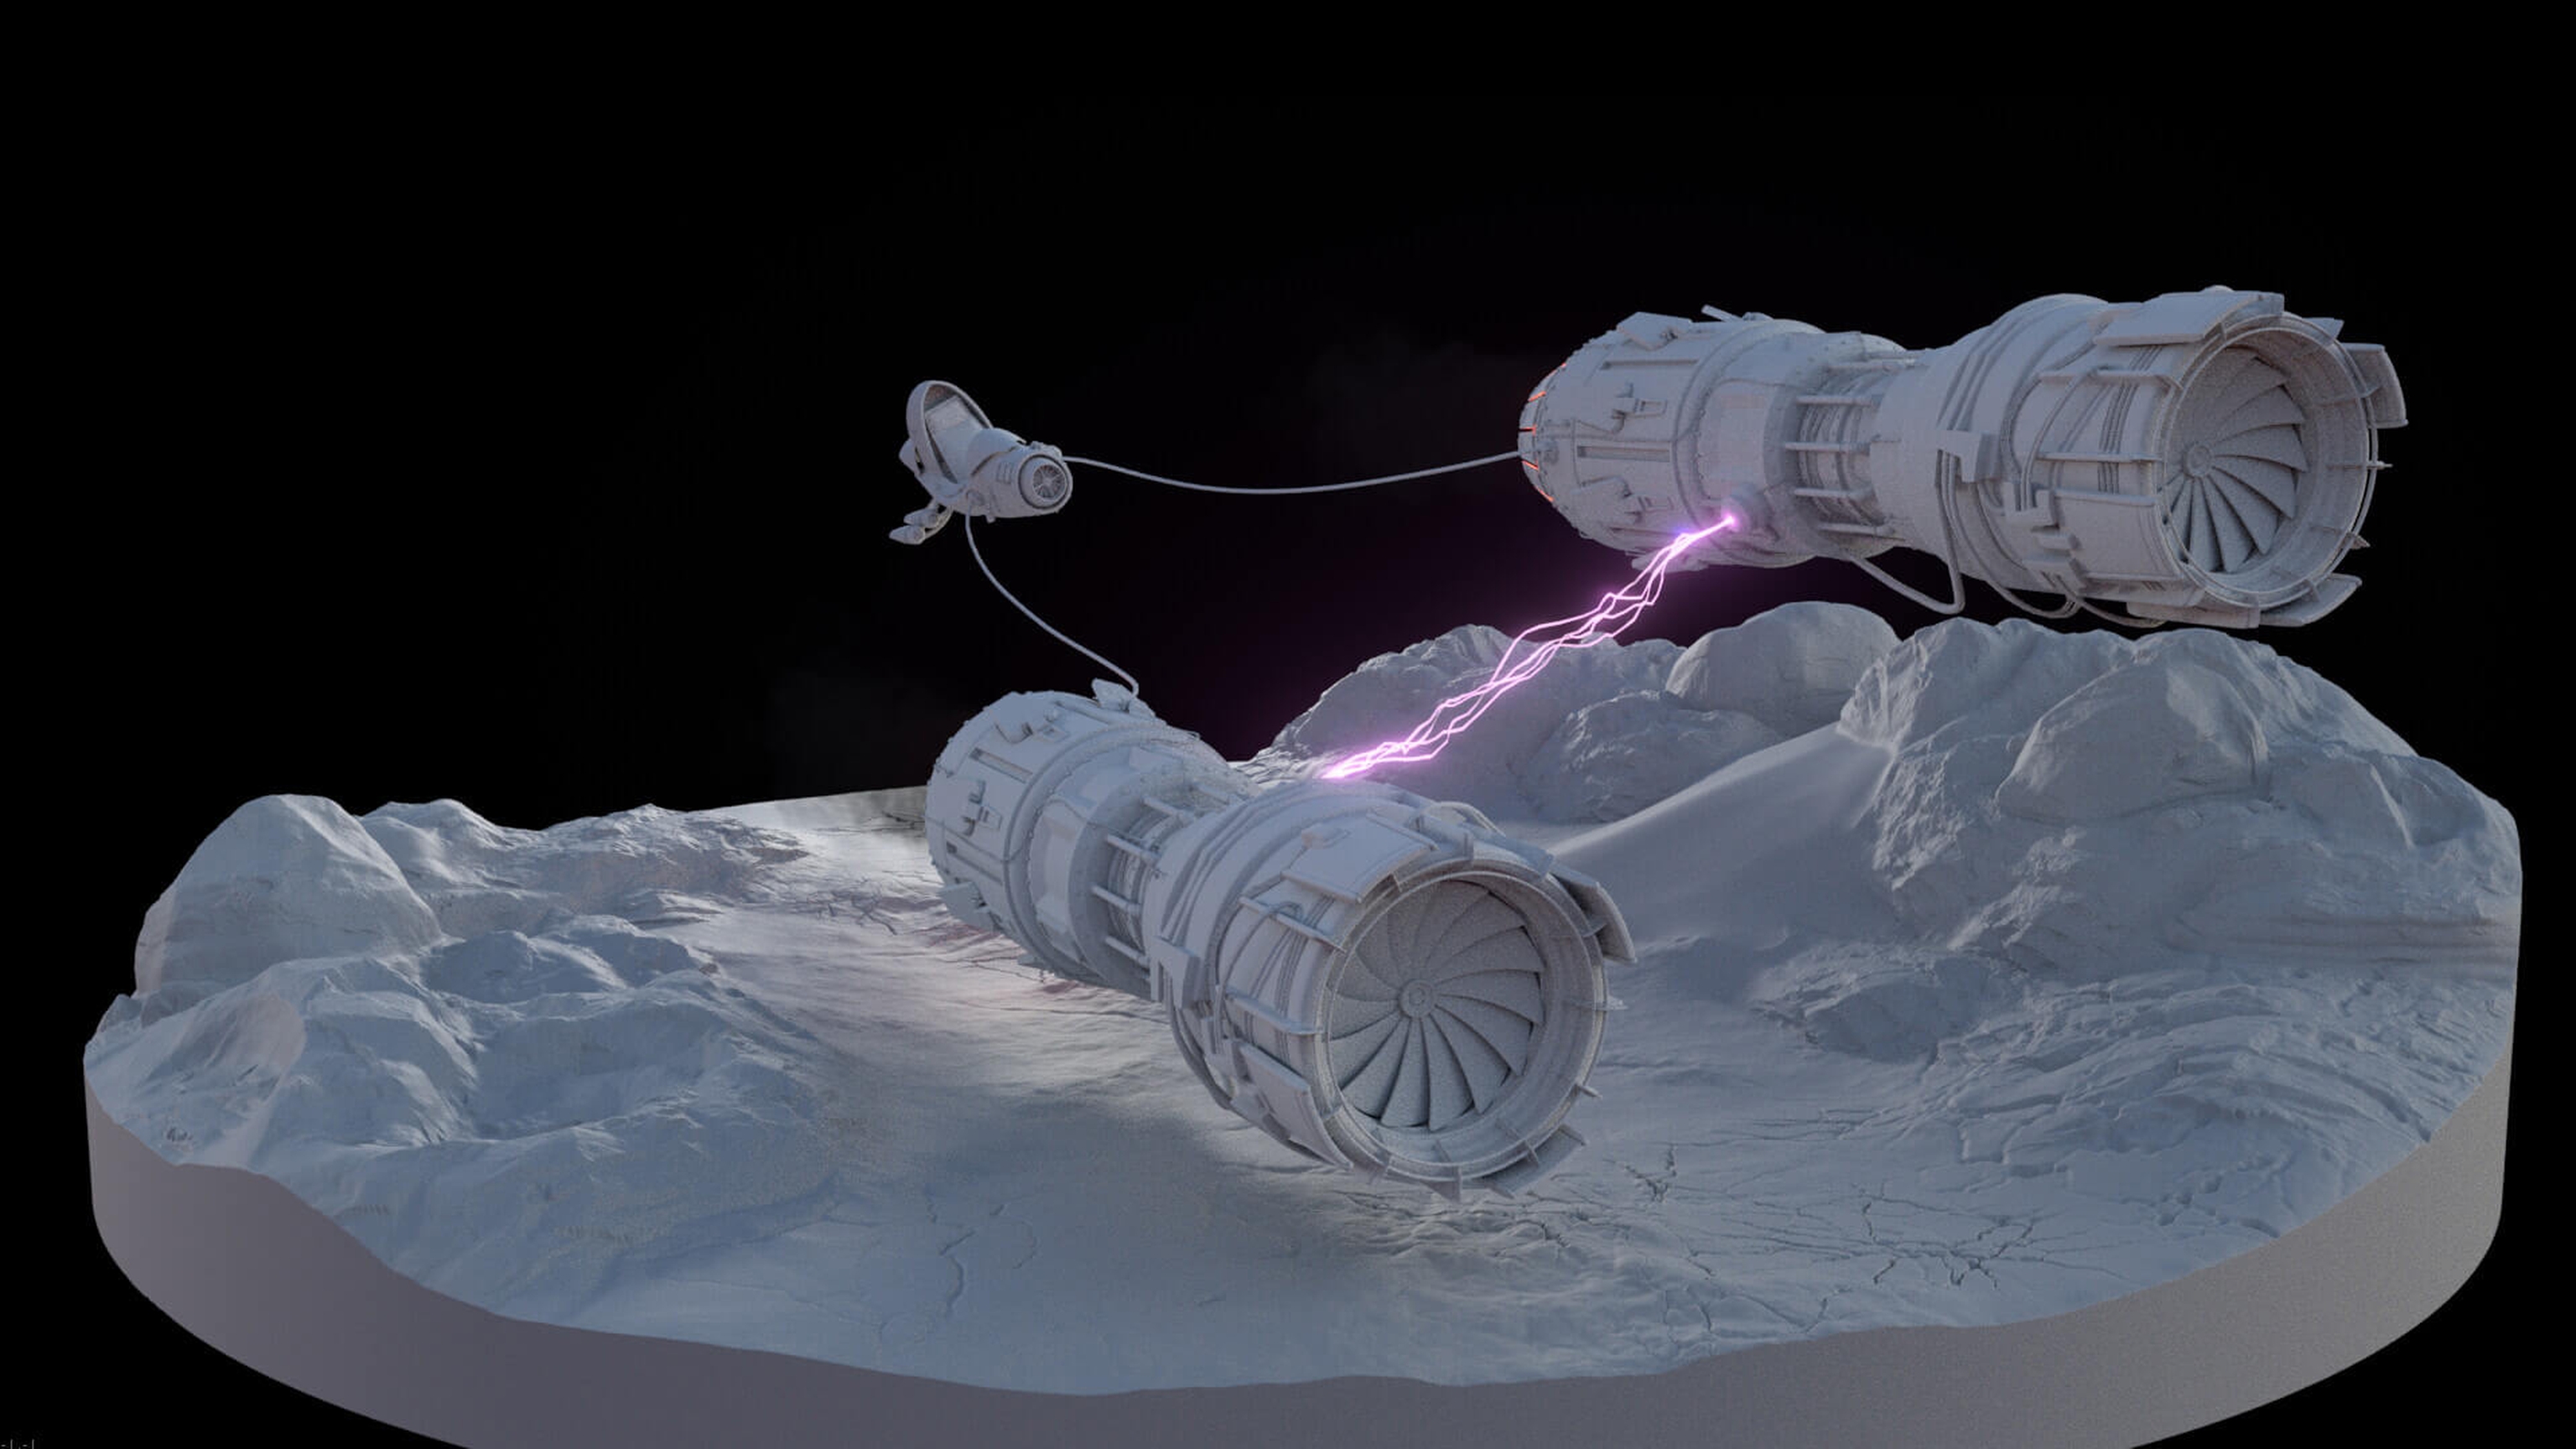 Previsualisation model of a spaceship moving over terrain